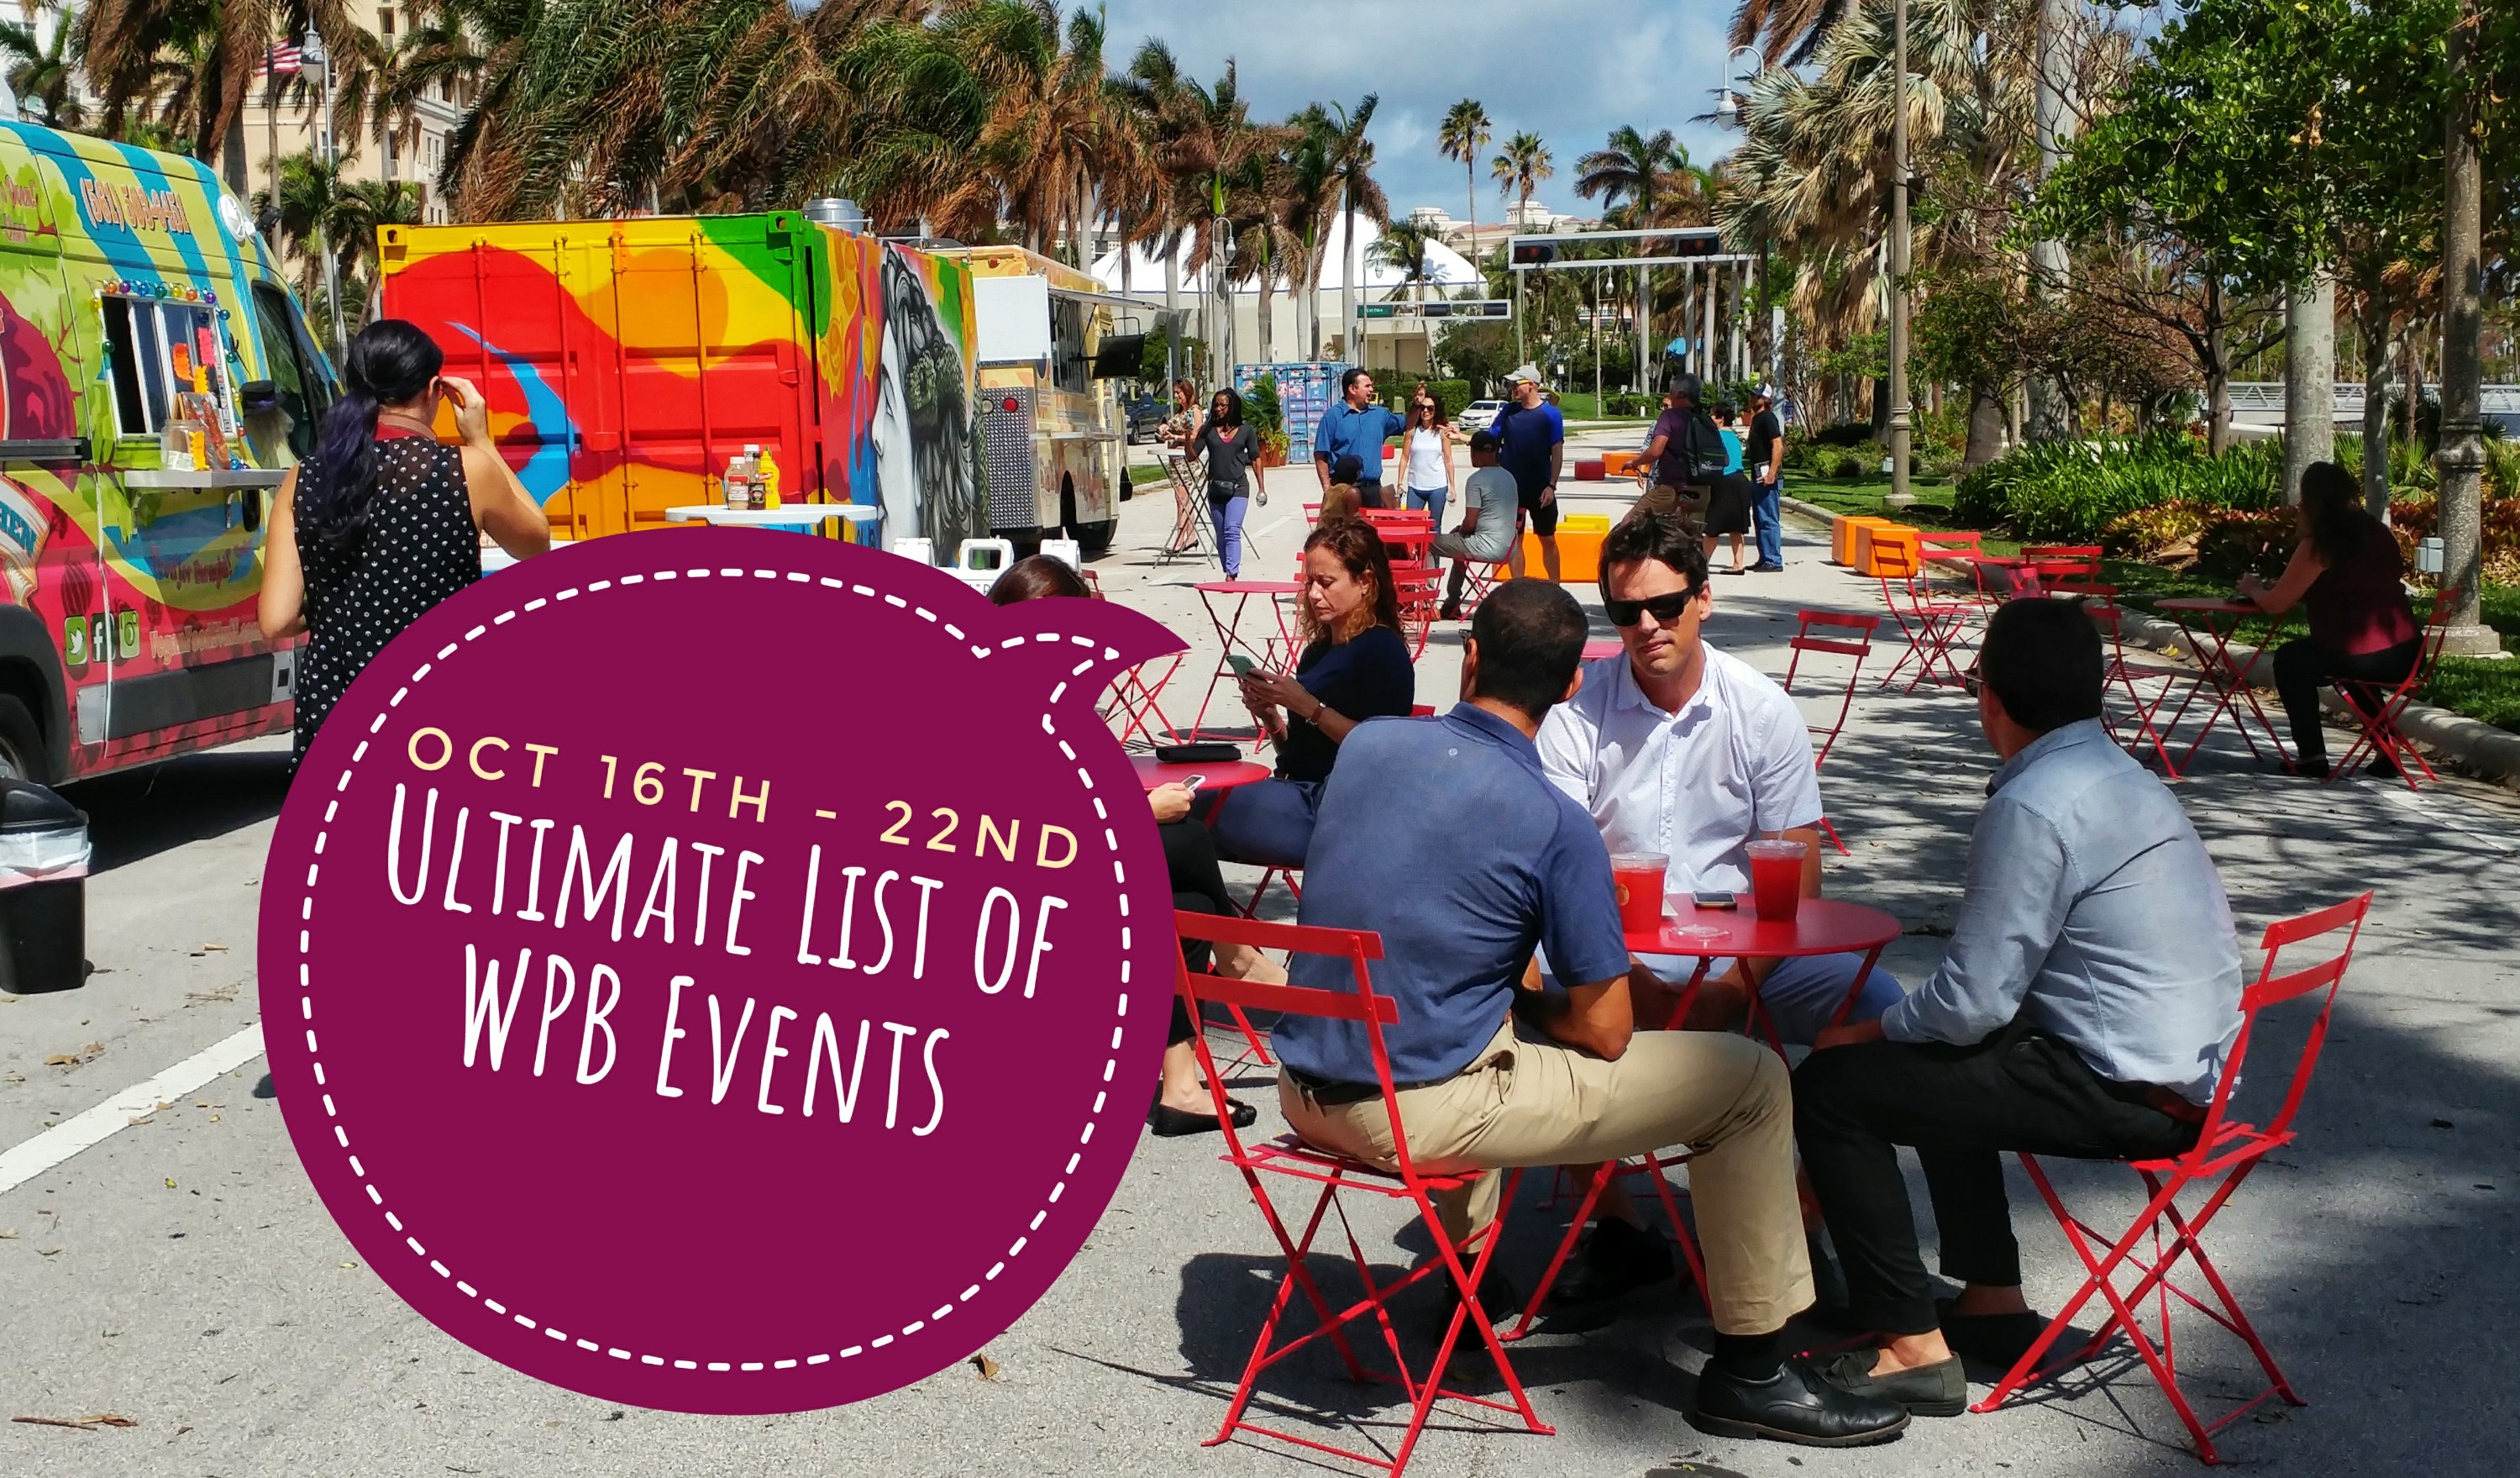 Ultimate list of West Palm Beach events – week of October 16th – 22nd